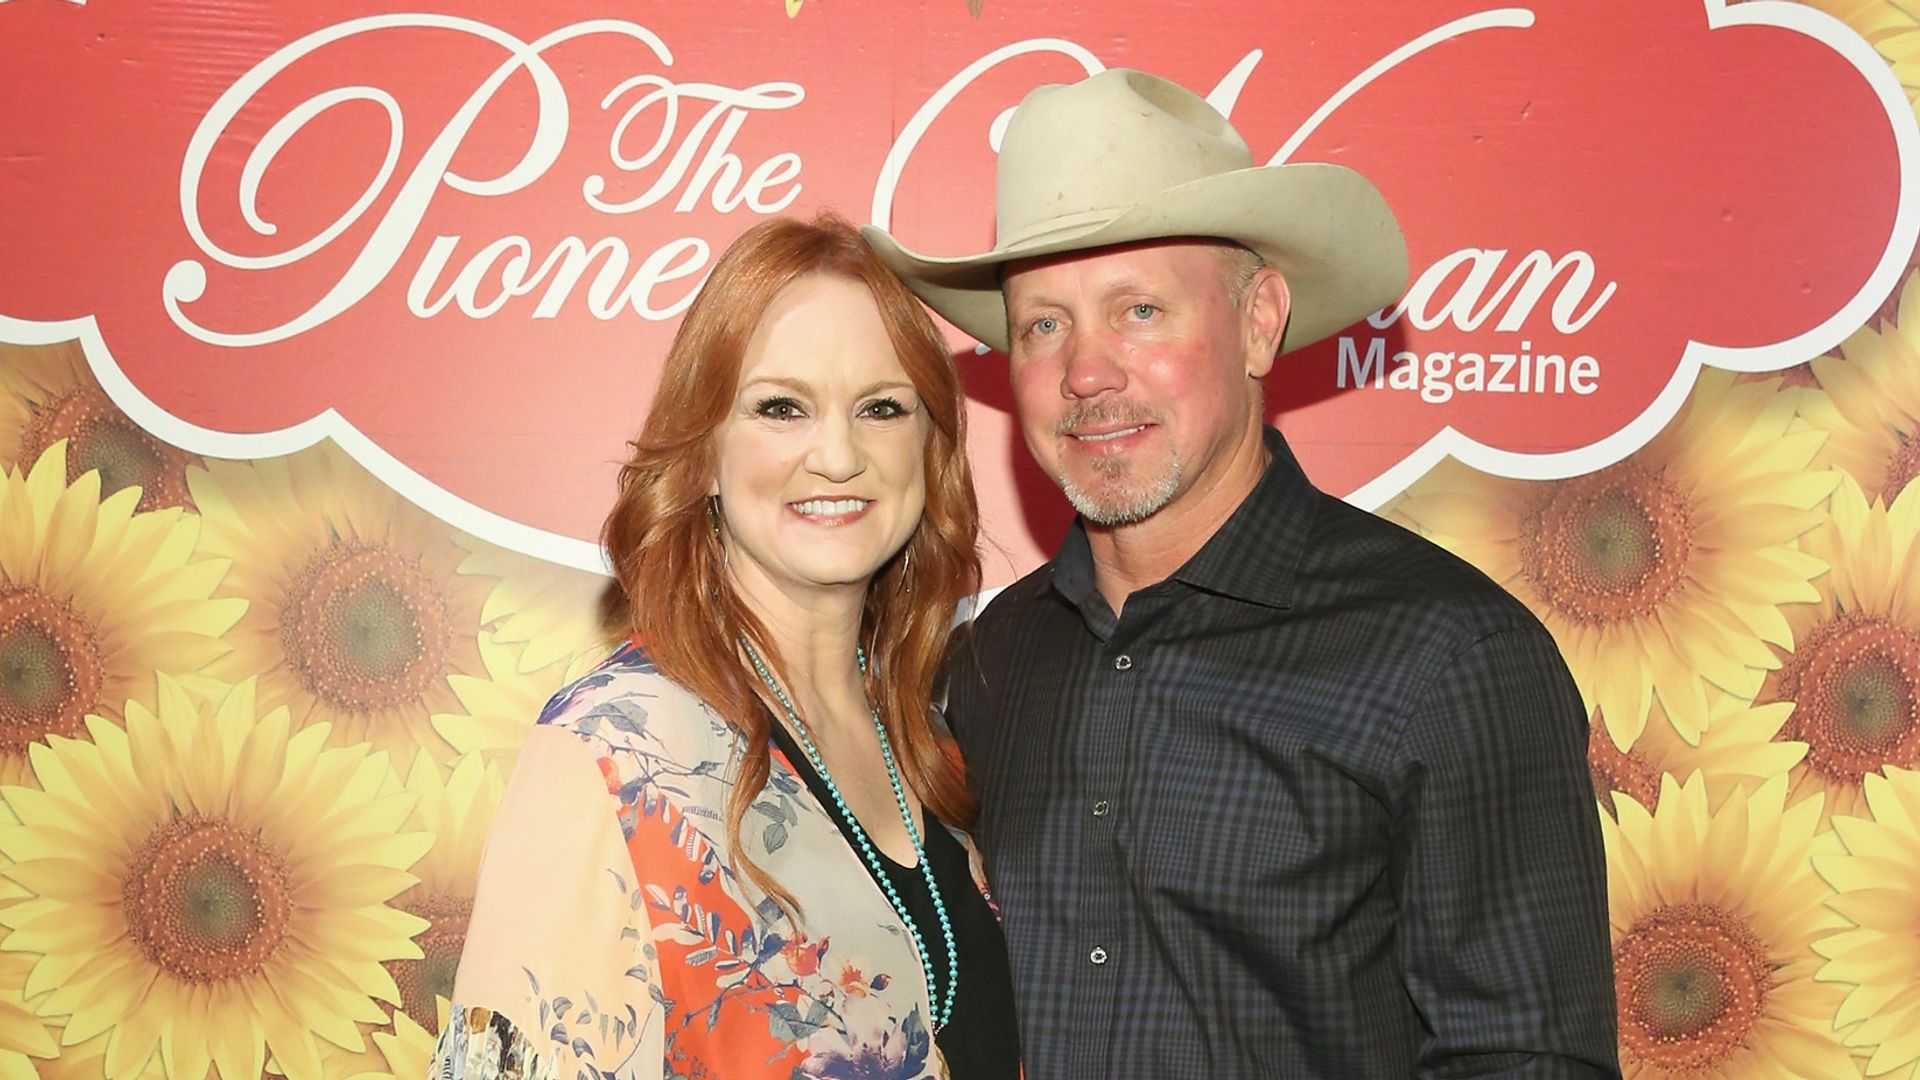 Ree Drummond and Ladd Drummond pose for a photo during The Pioneer Woman Magazine Celebration on June 6, 2017 in New York City